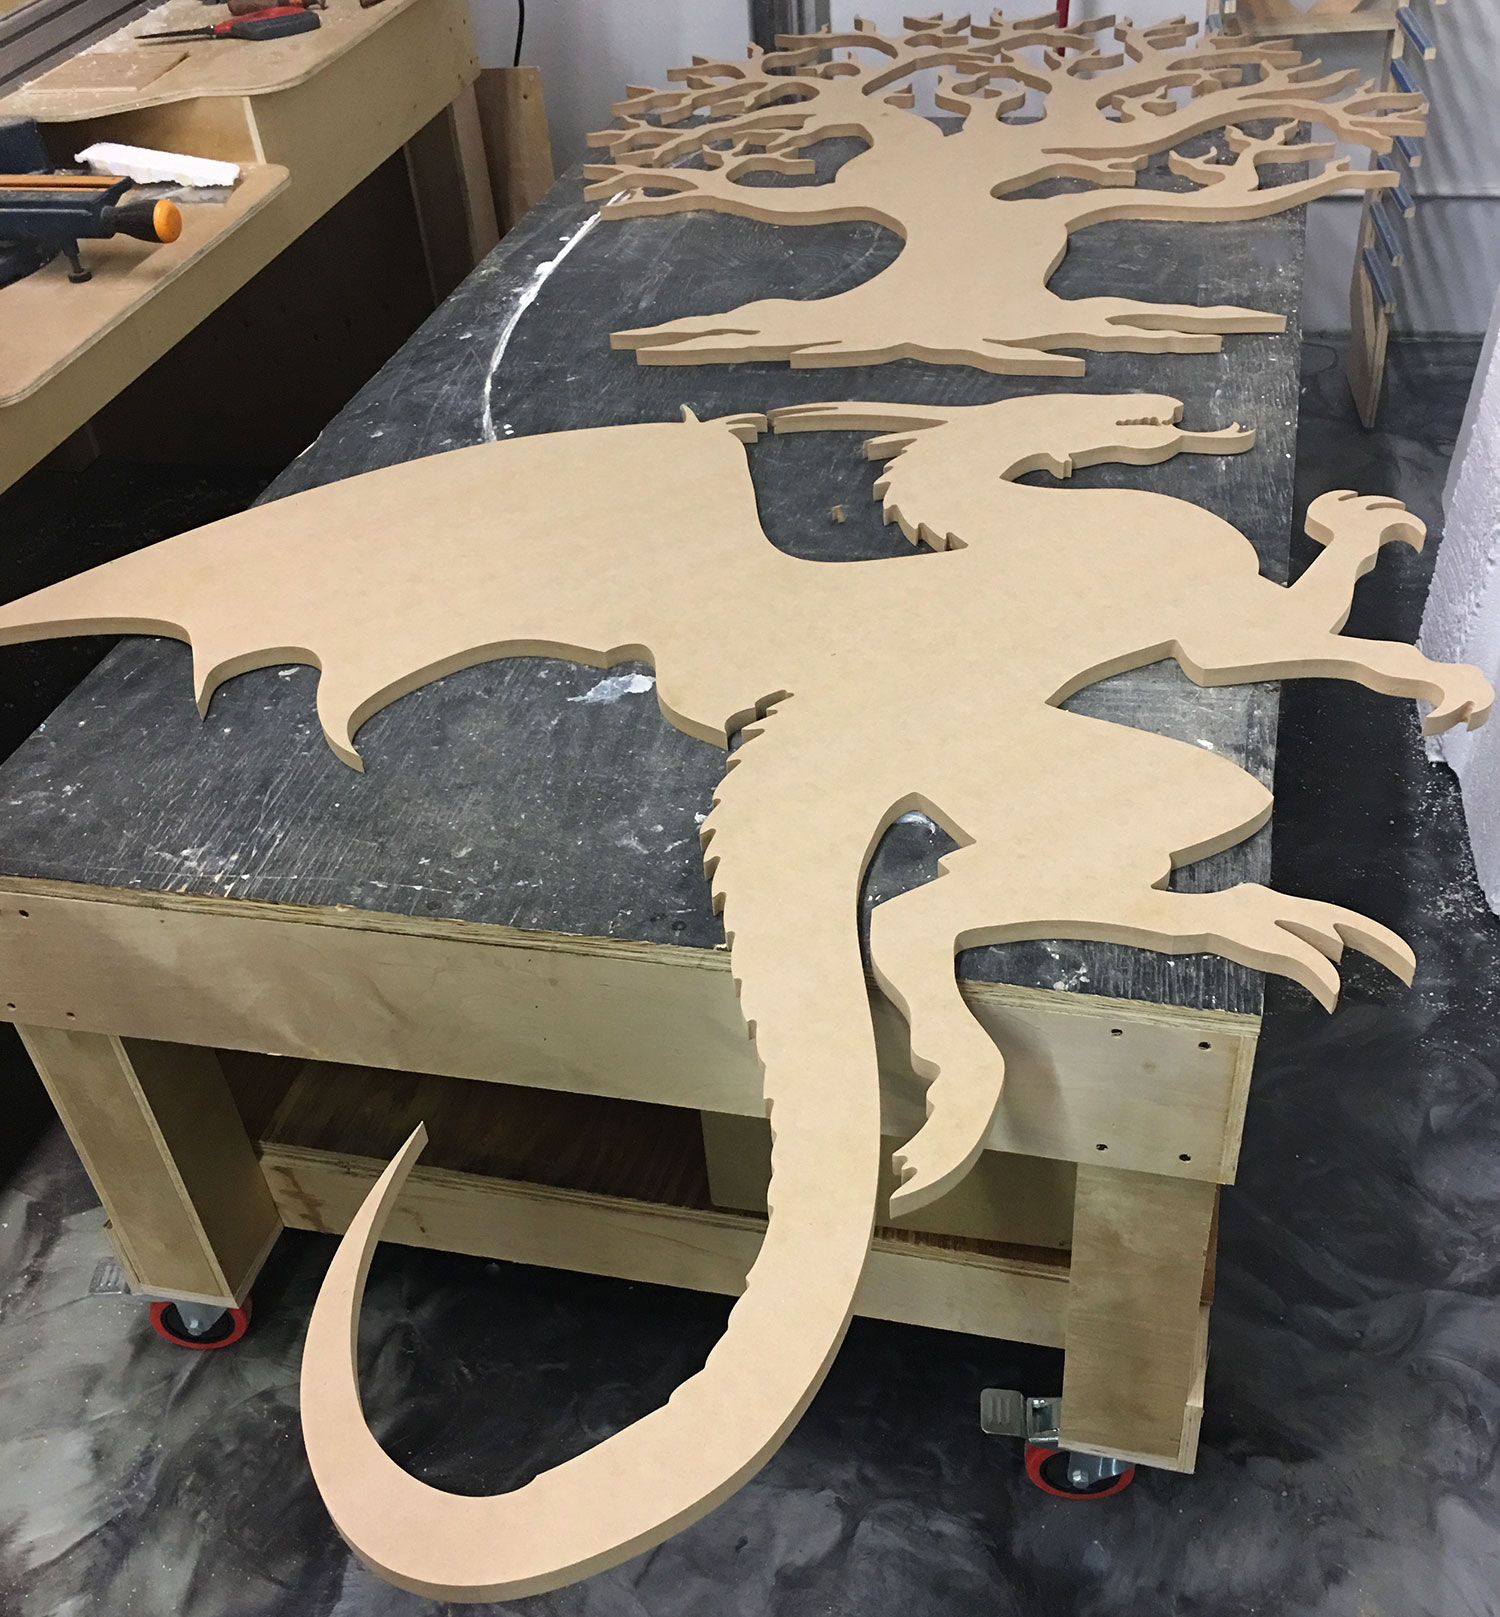 cnc cut figure of a dragon and a tree made out of wood.